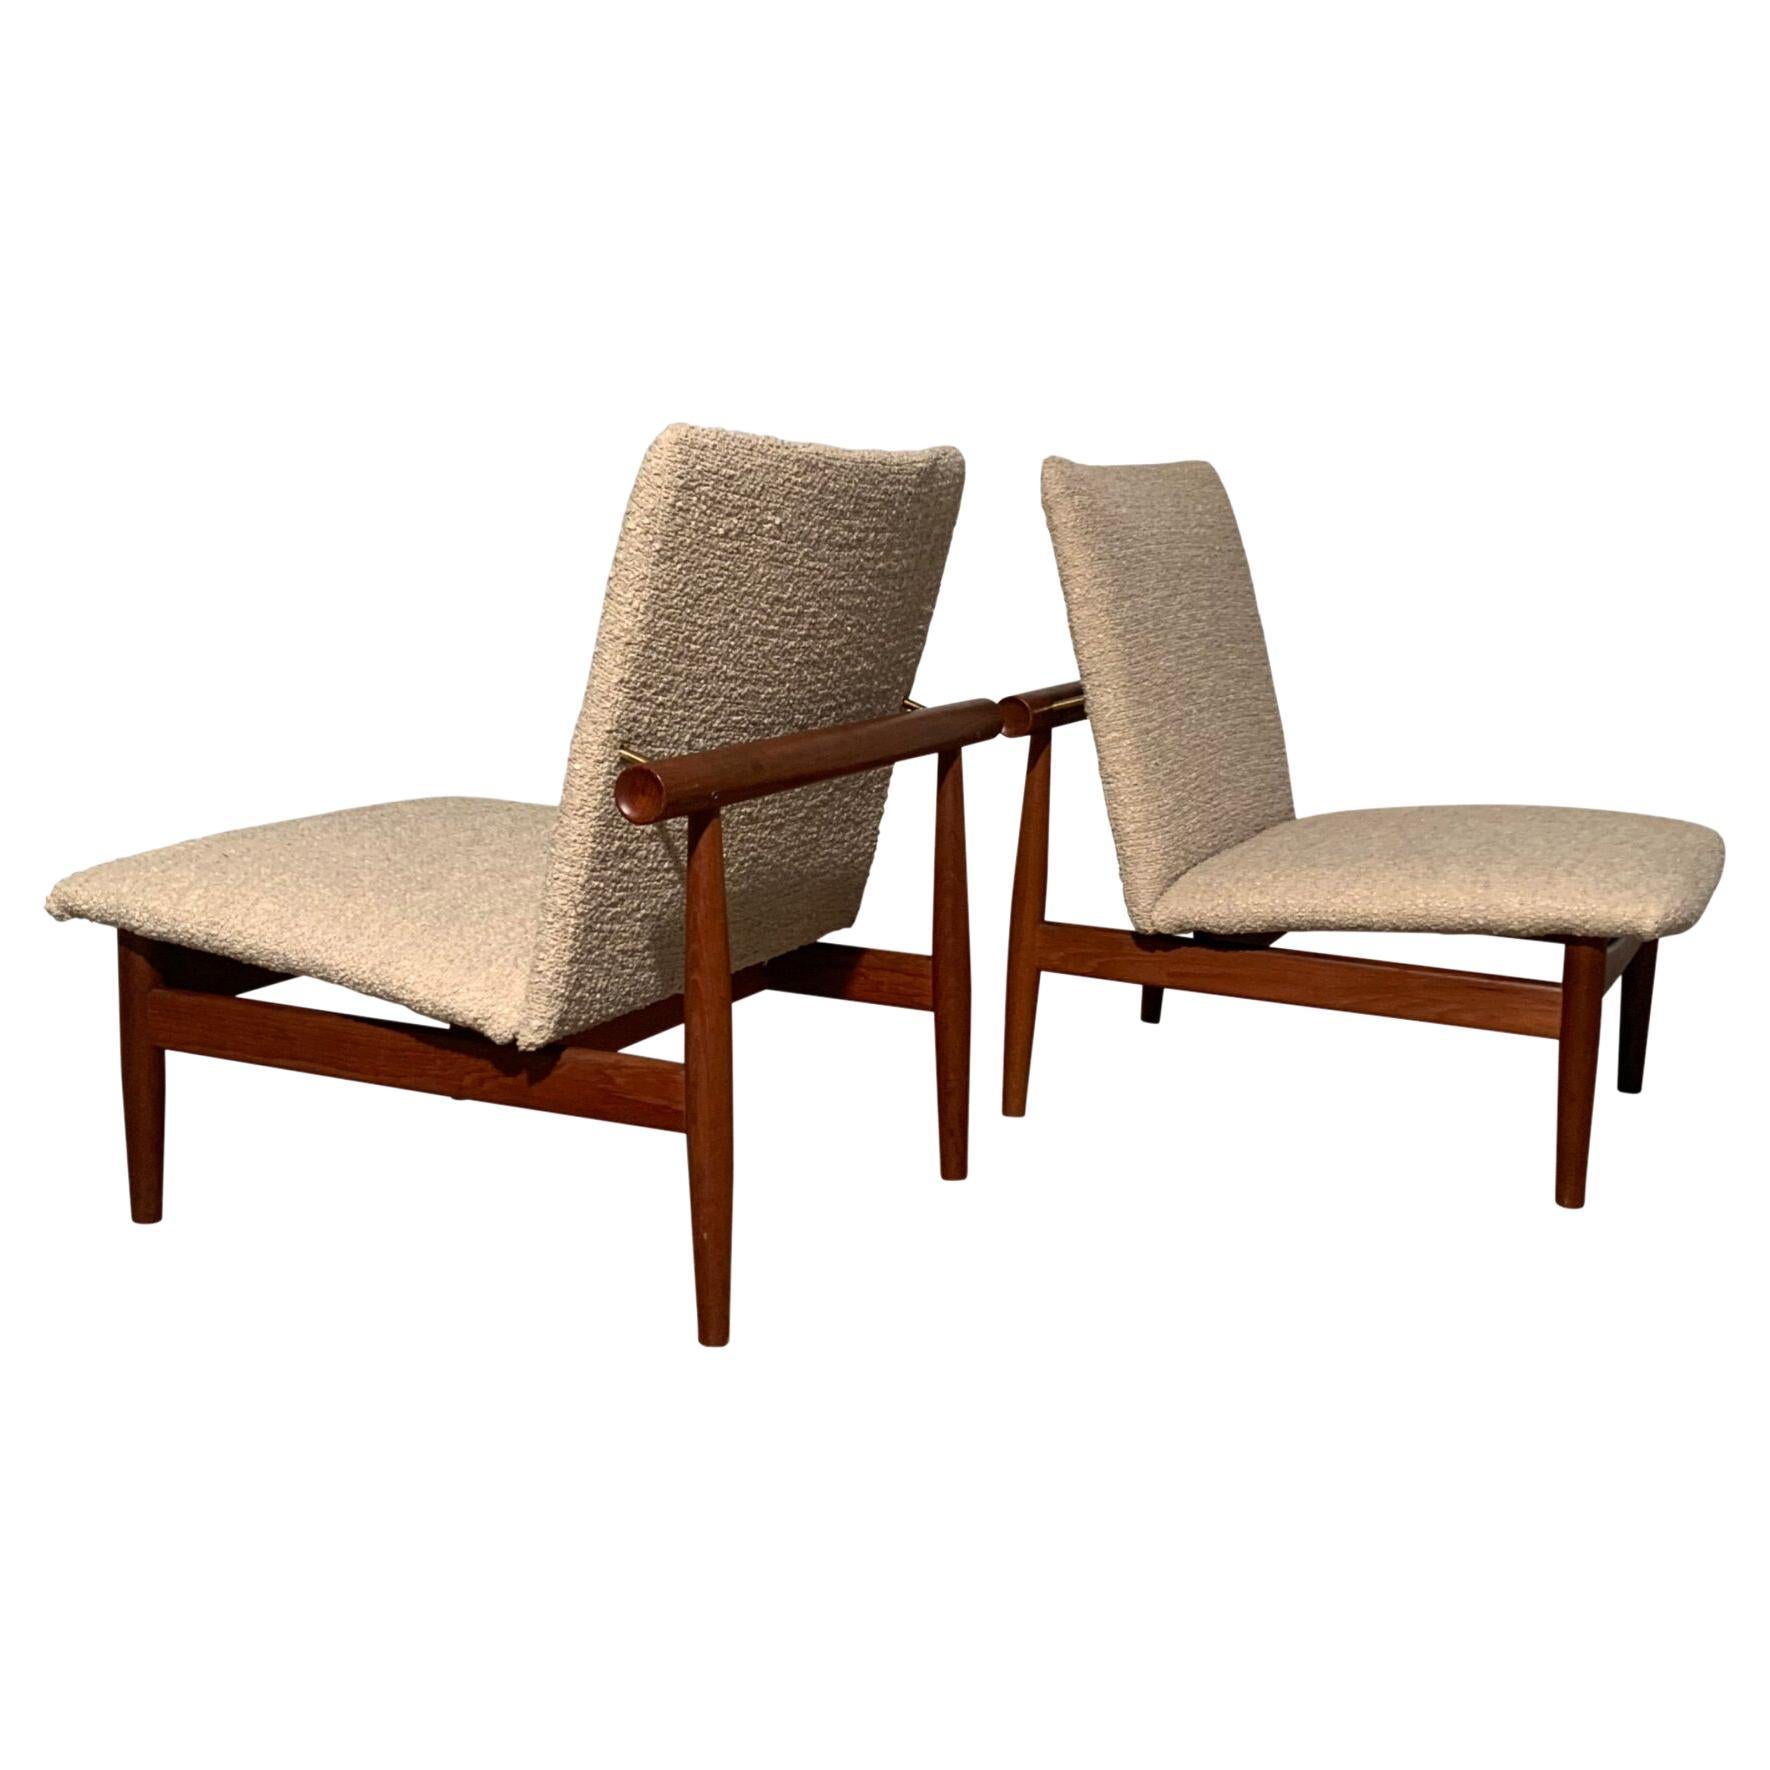 Pair of Finn Juhl Japan Lounge Chairs in Teak and Bouclé Fabric for France & Son For Sale